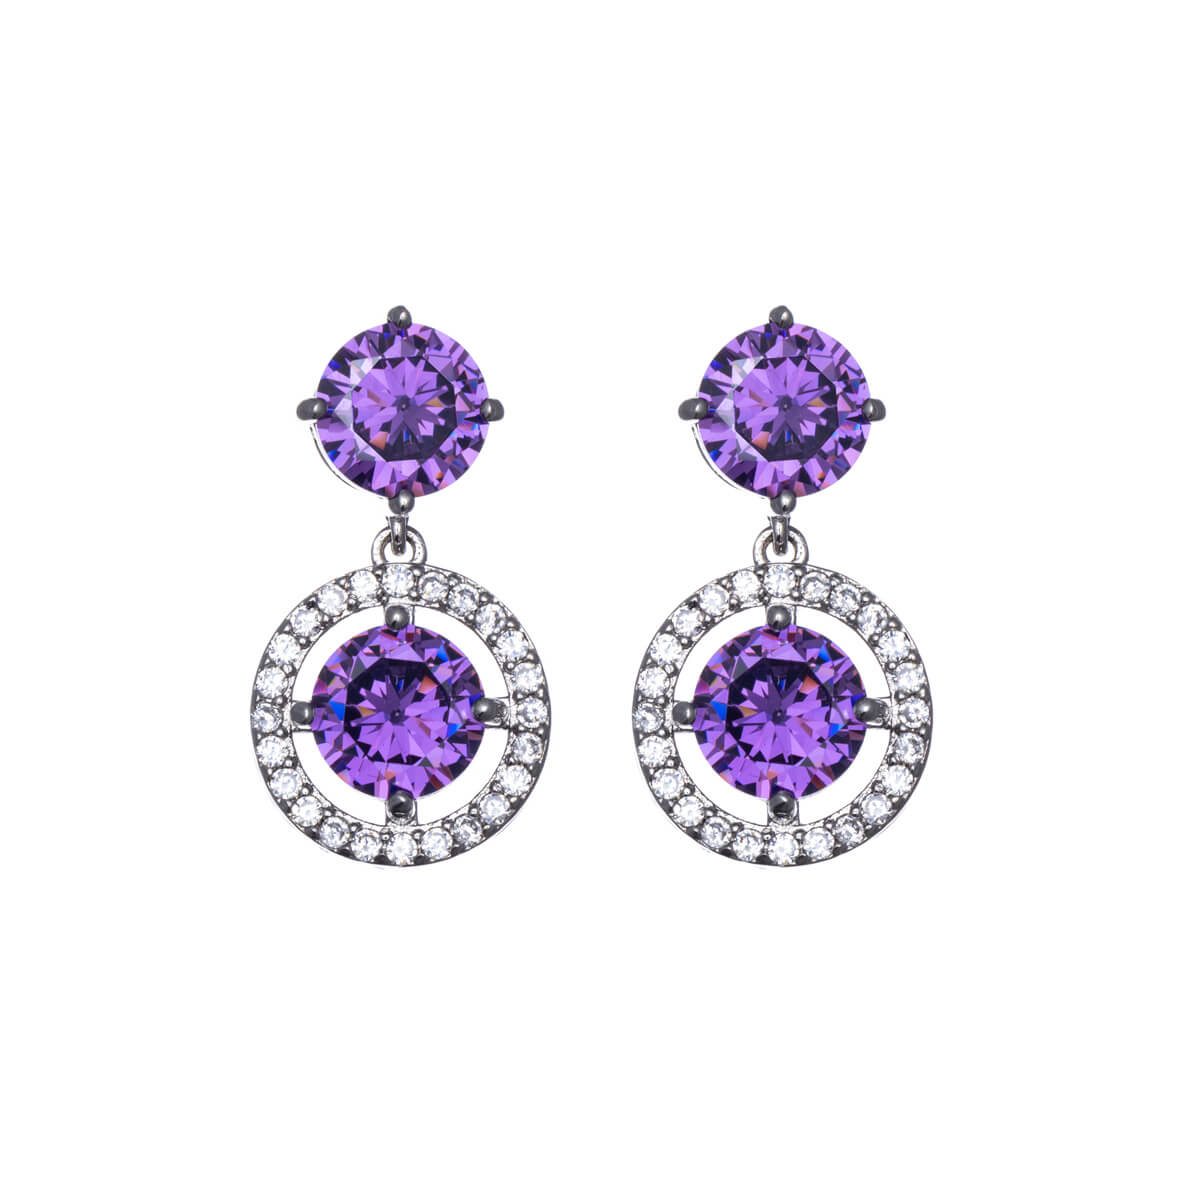 Delicate zirconia earrings with dangling circle